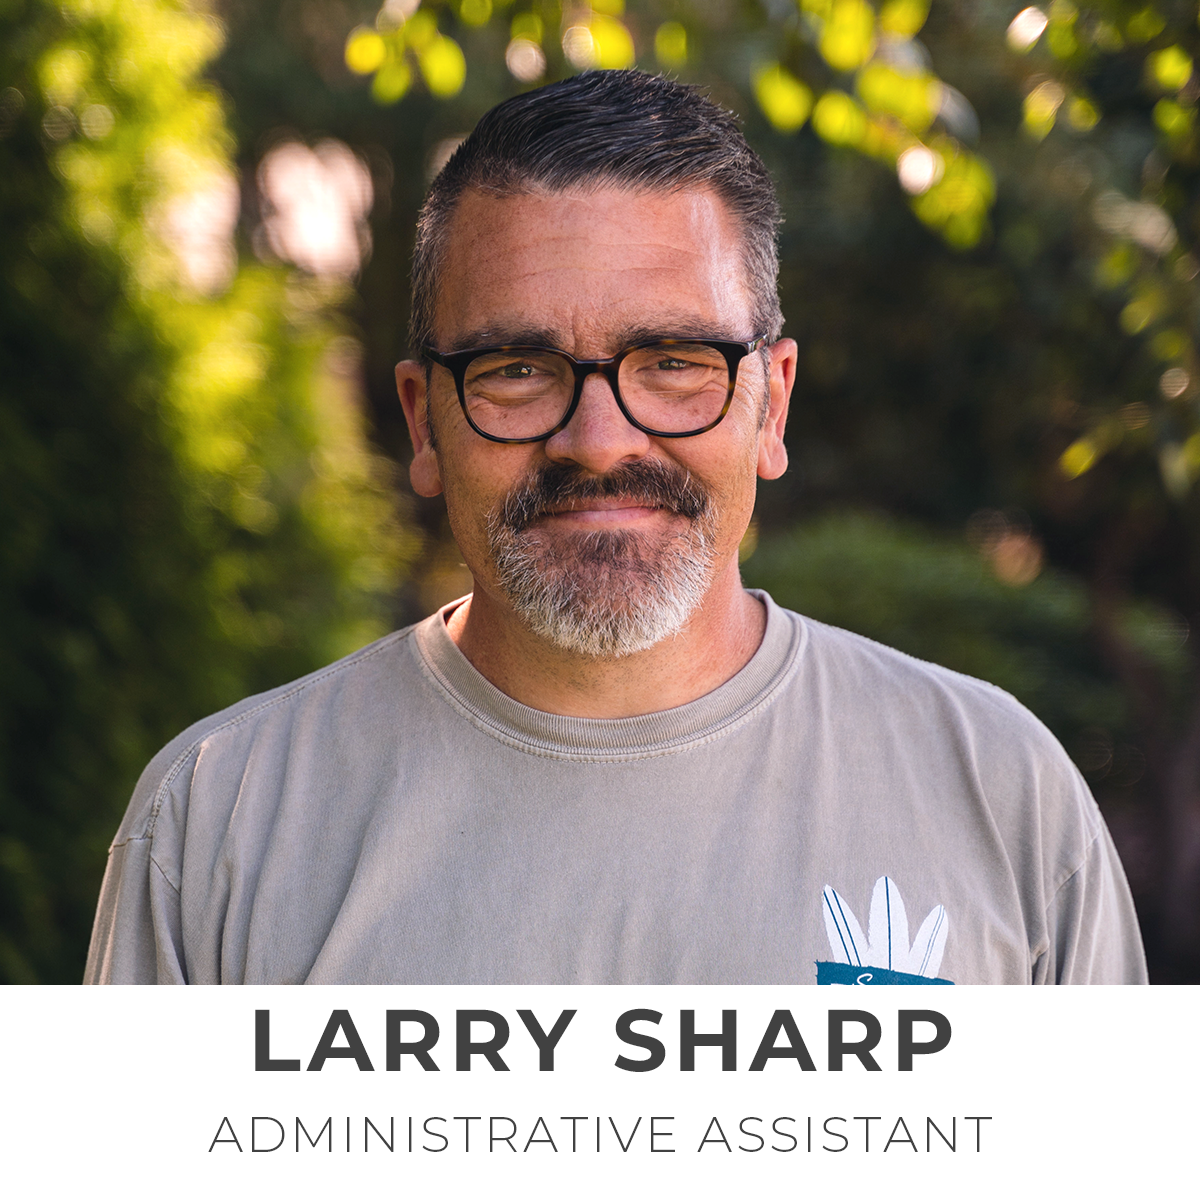 Larry Sharp, Administrative Assistant